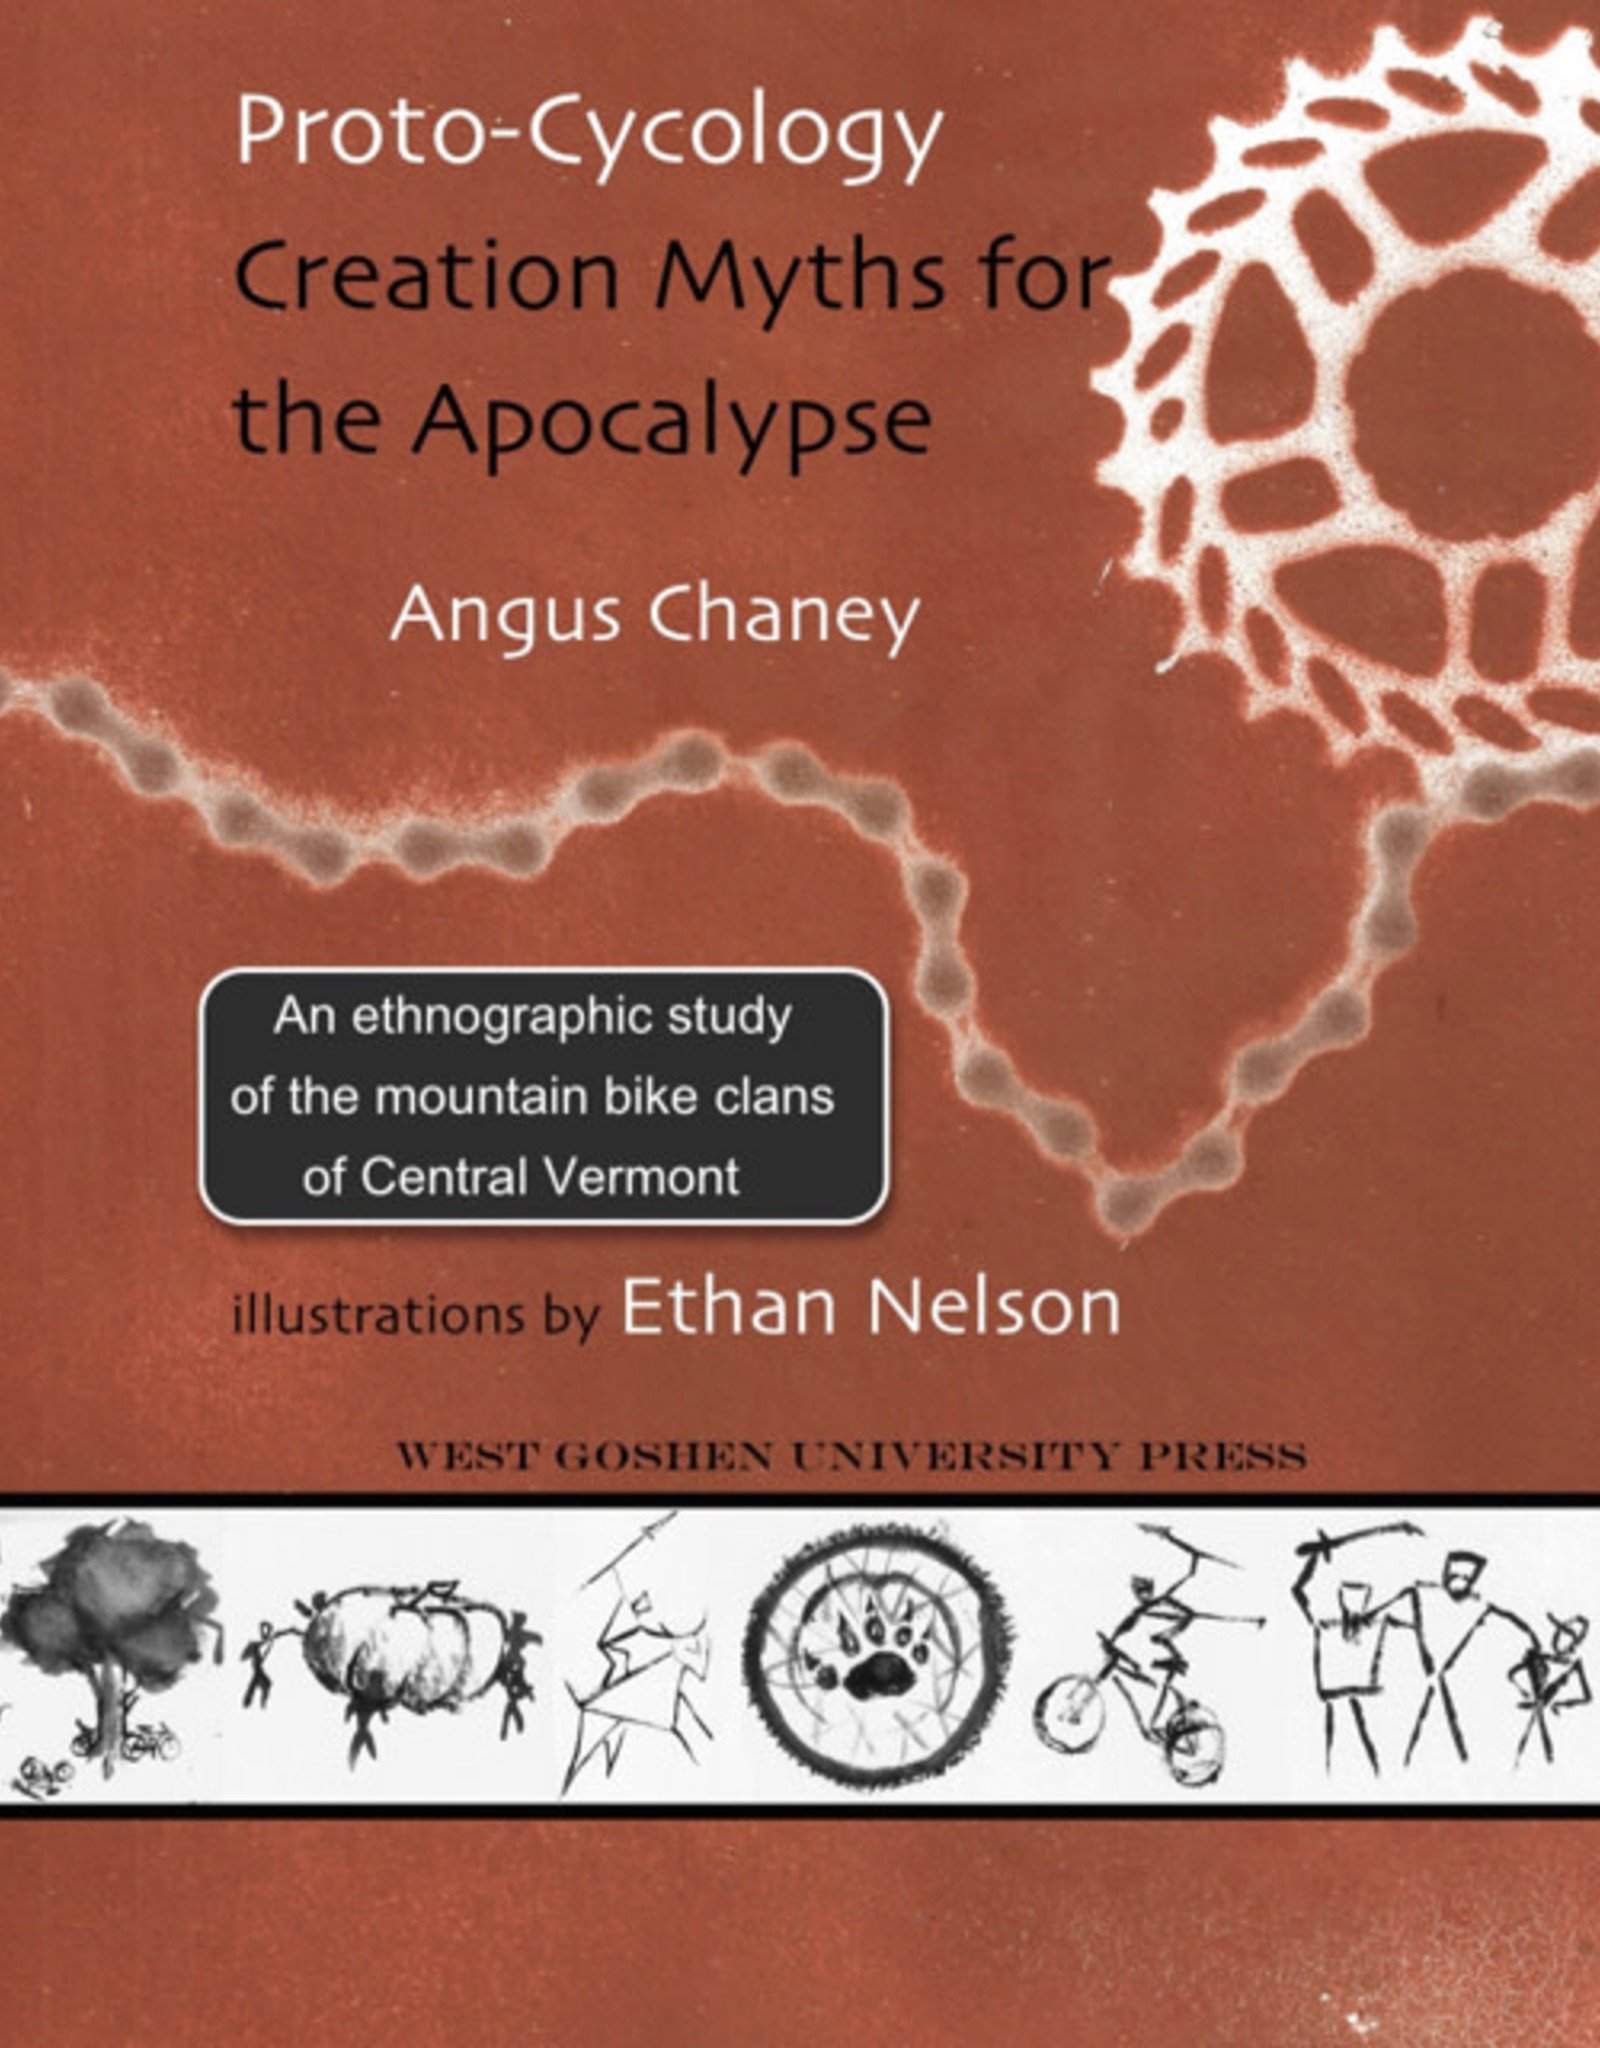 Proto-Cycology: Creation Myths for the Apocalypse by Angus Chaney